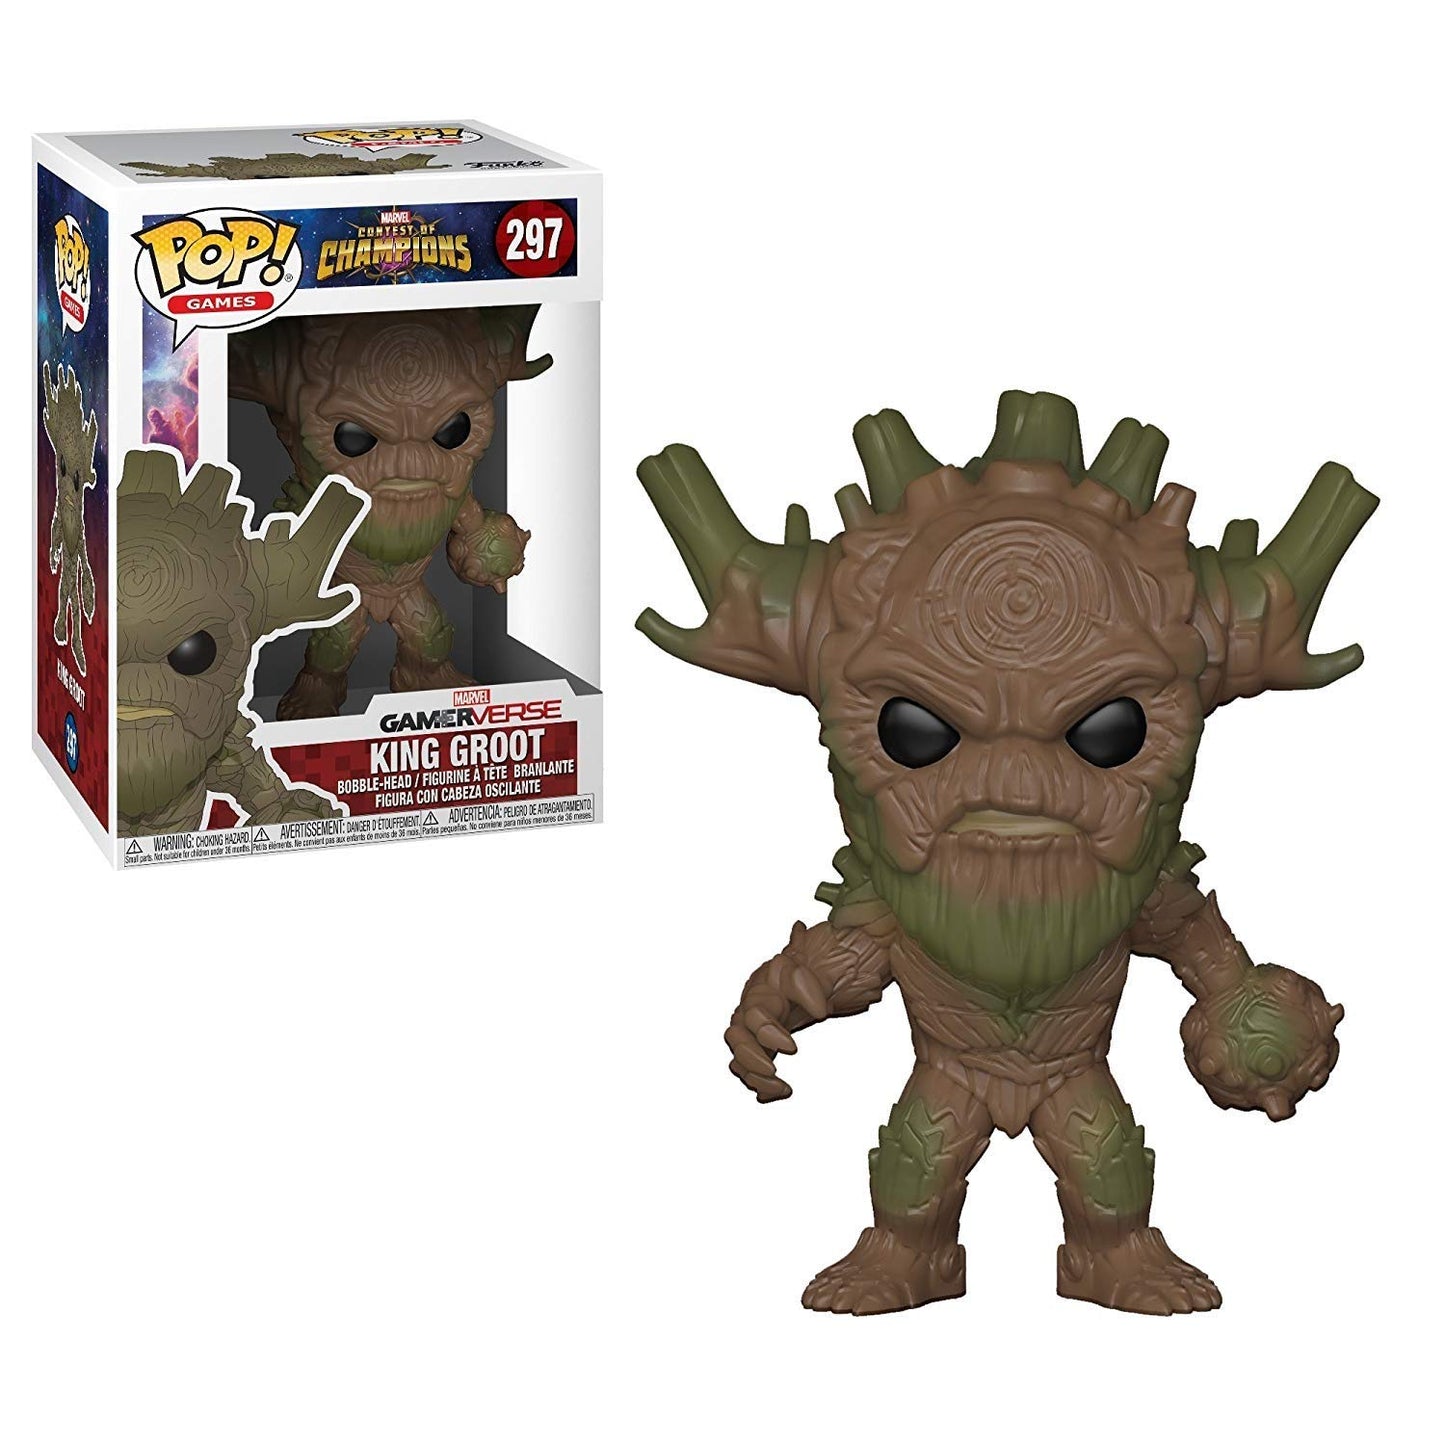 Funko POP! Games King Groot Marvel Contest of Champions #297